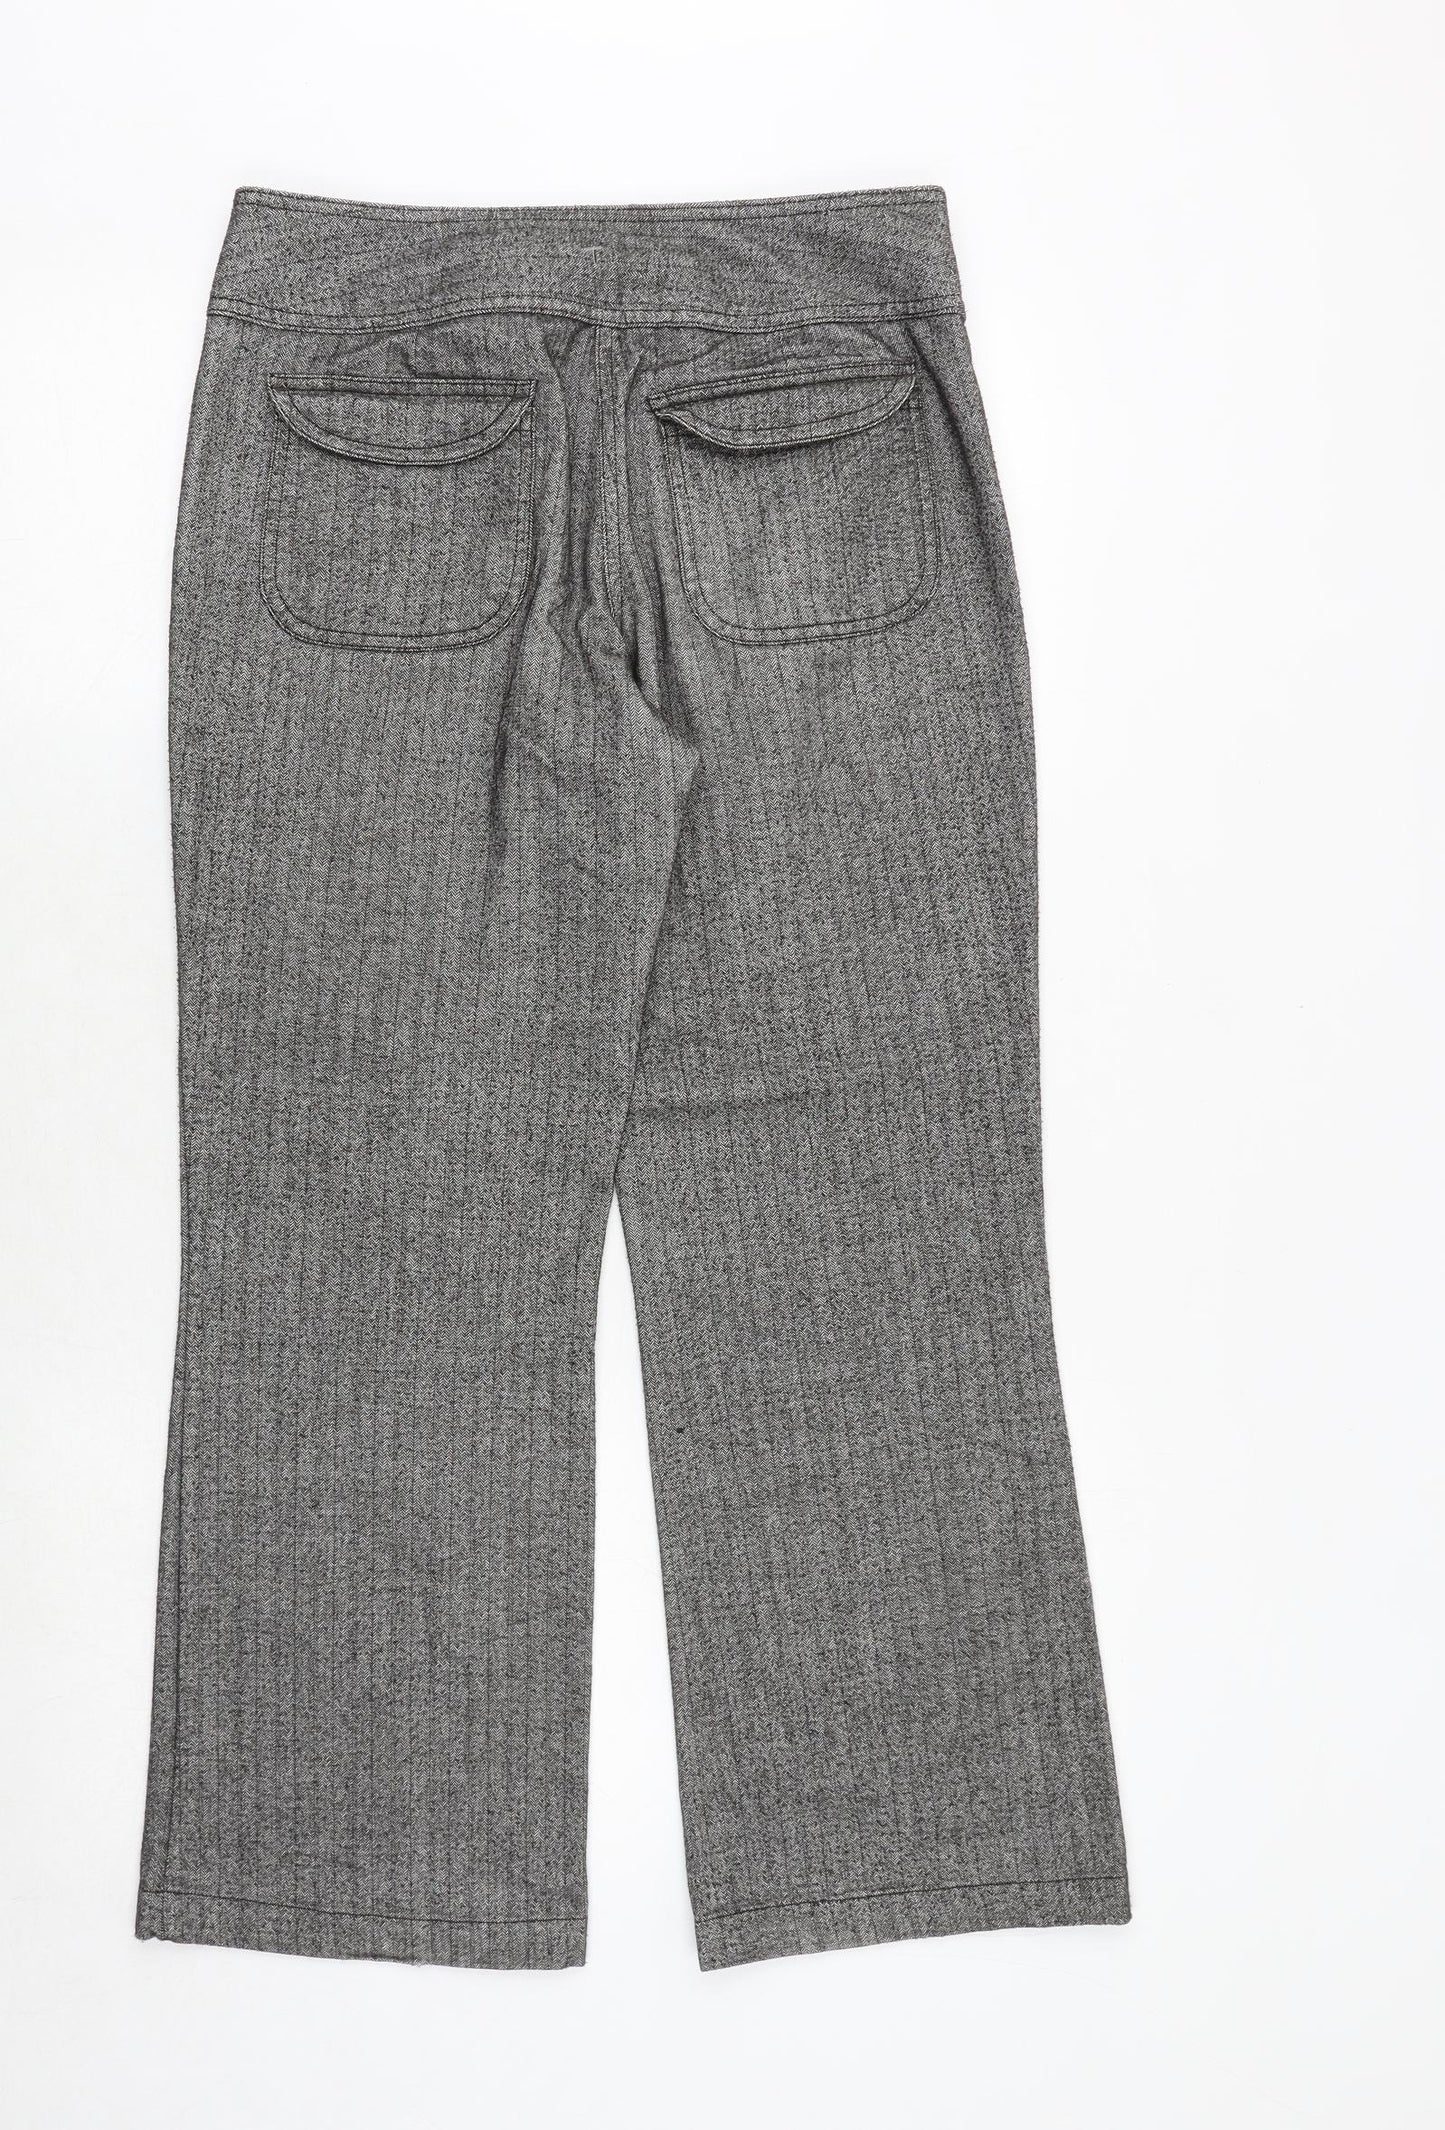 Marks and Spencer Womens Grey Polyester Trousers Size 10 Regular Zip